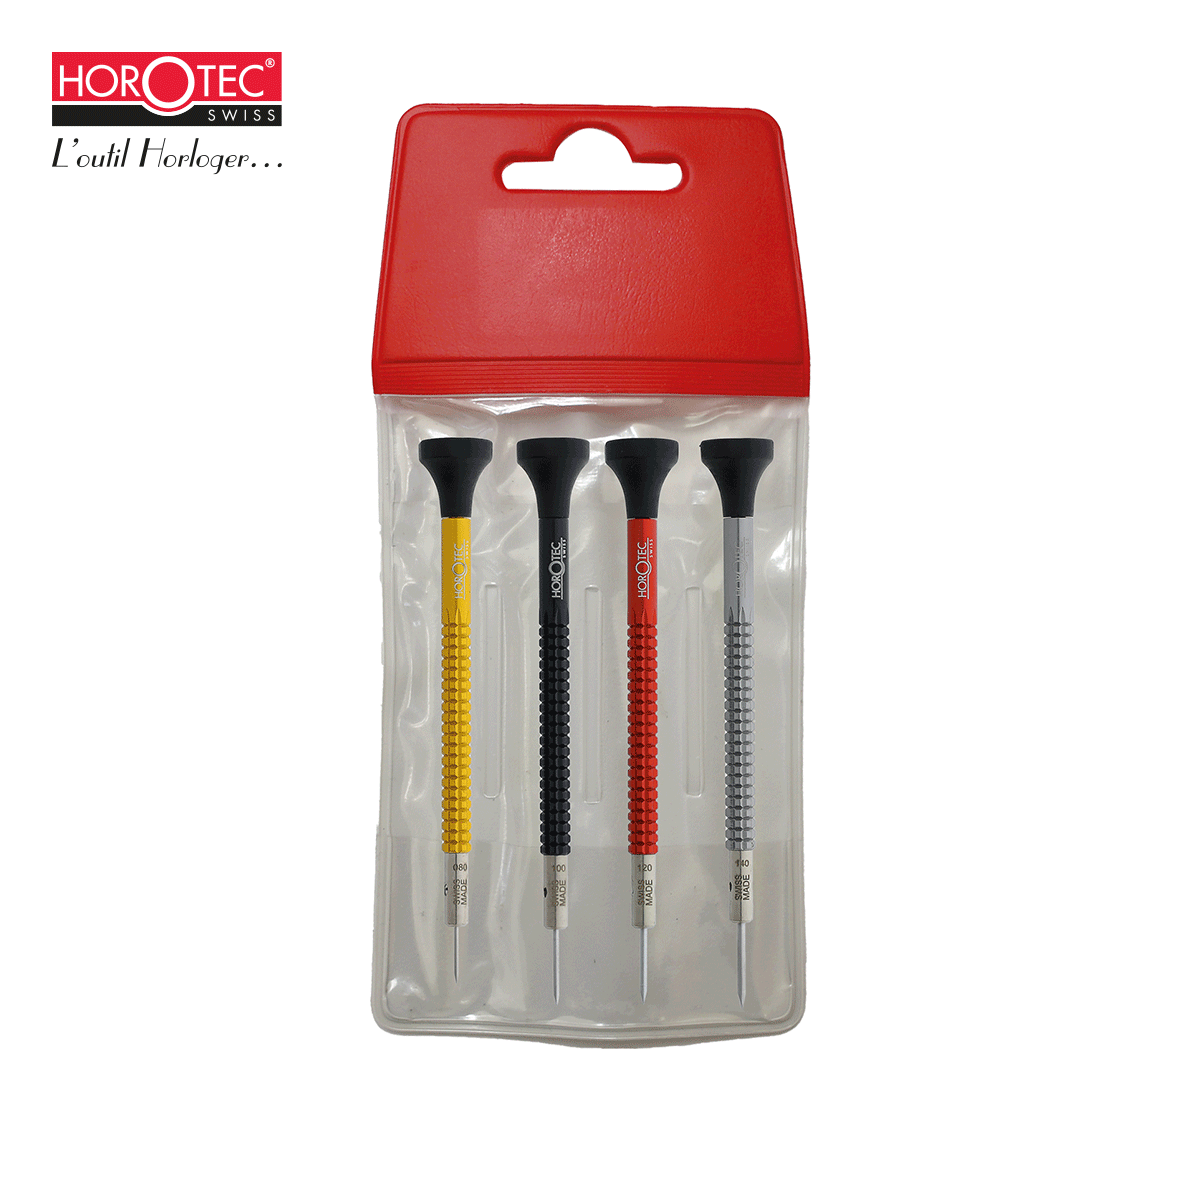 HOROTEC® Aluminum Screwdriver Set with 4 Screwdrivers in Plastic Pouch